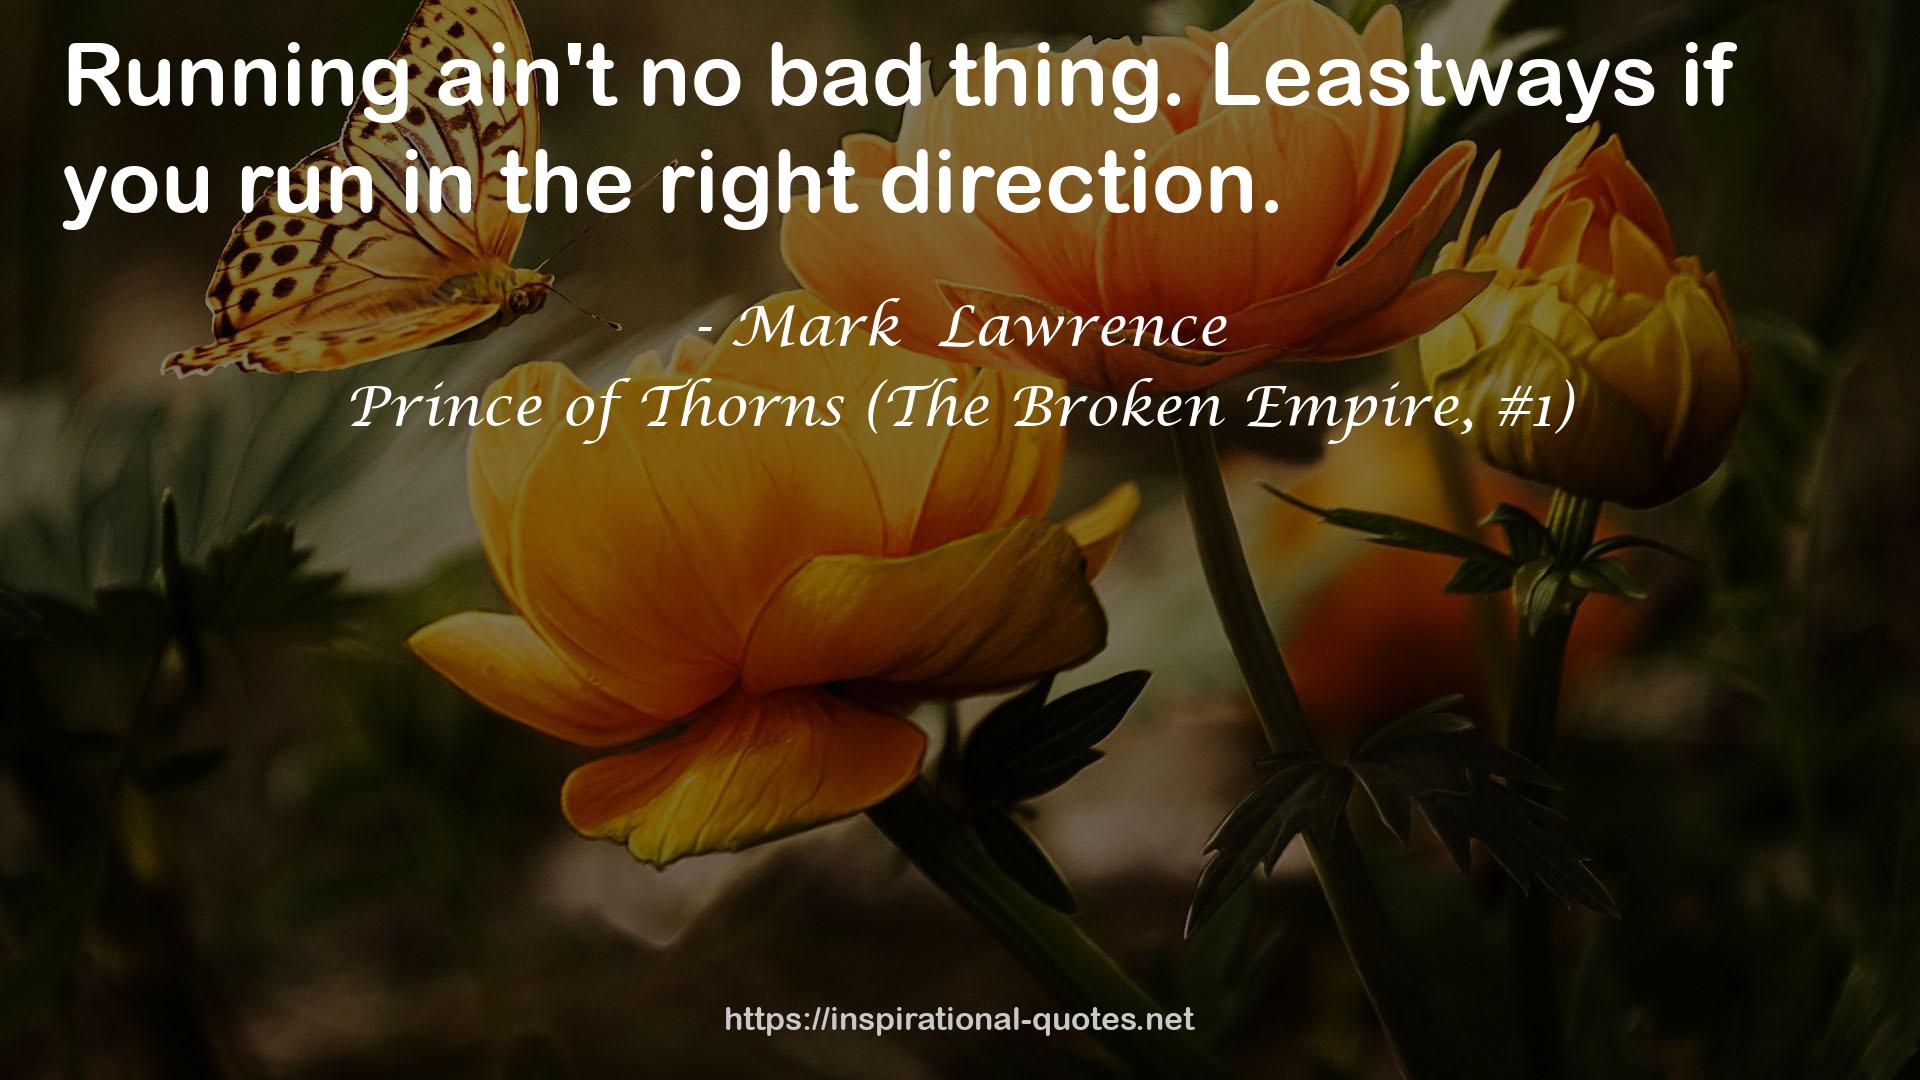 Prince of Thorns (The Broken Empire, #1) QUOTES